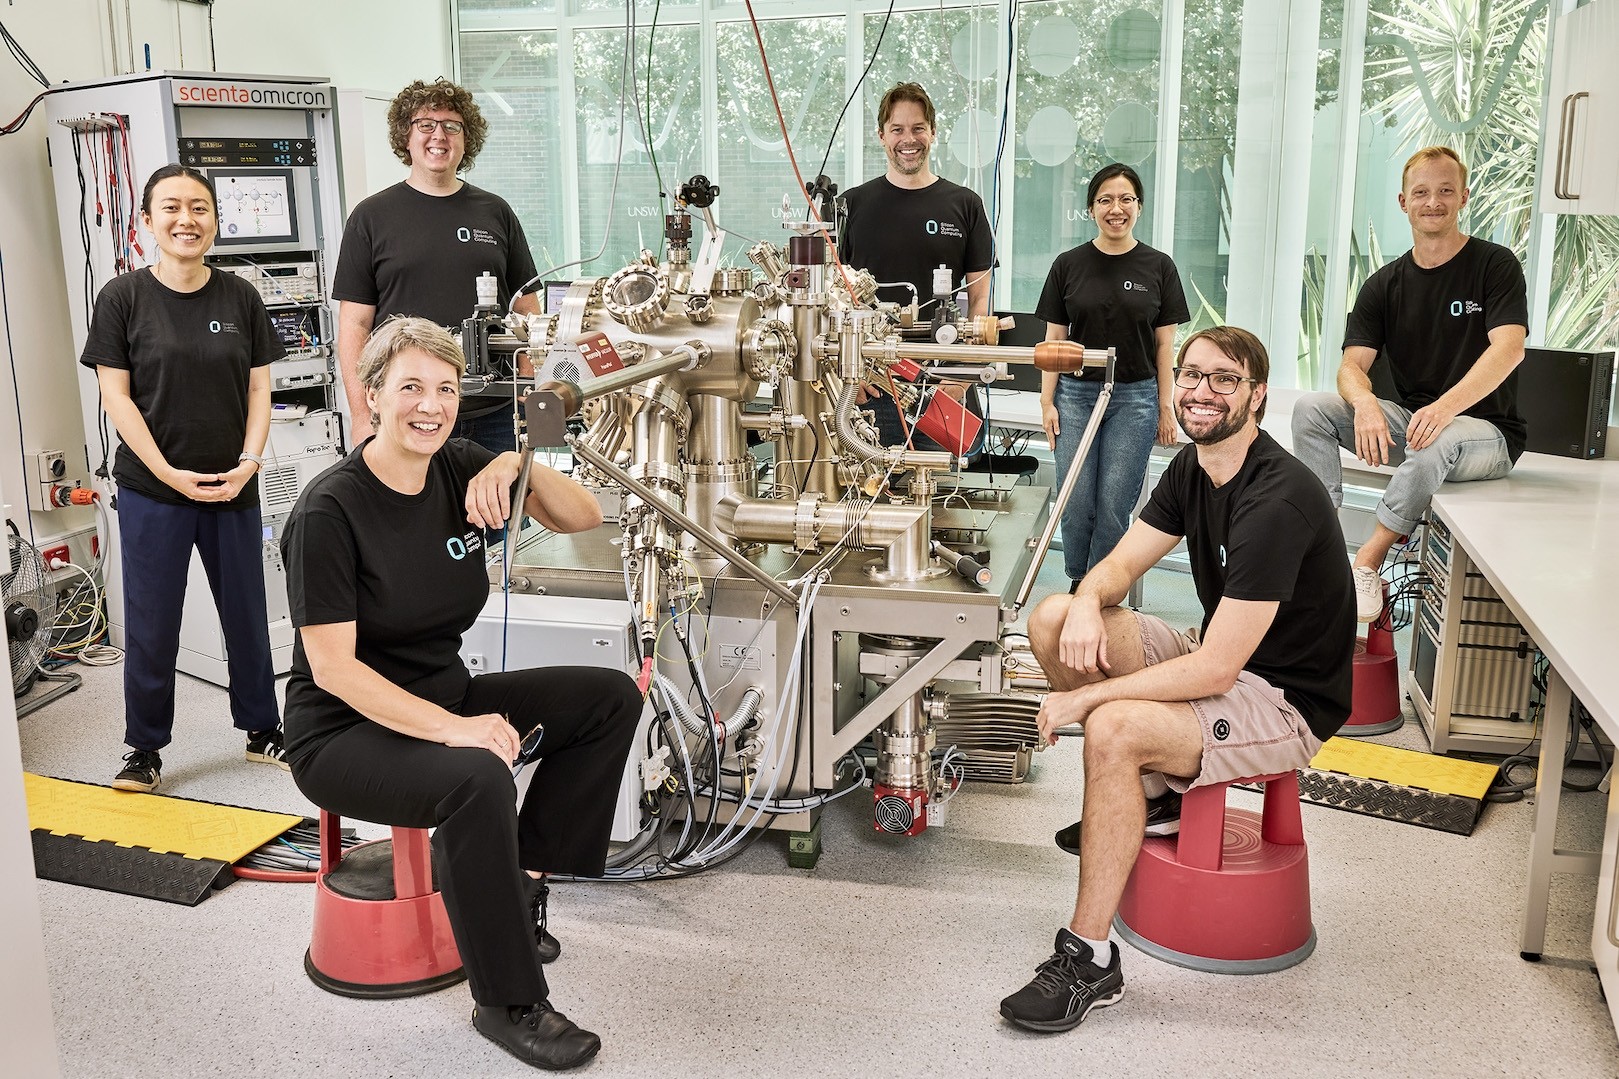 "The authors of the Nature paper in the Silicon Quantum Computing laboratory. "